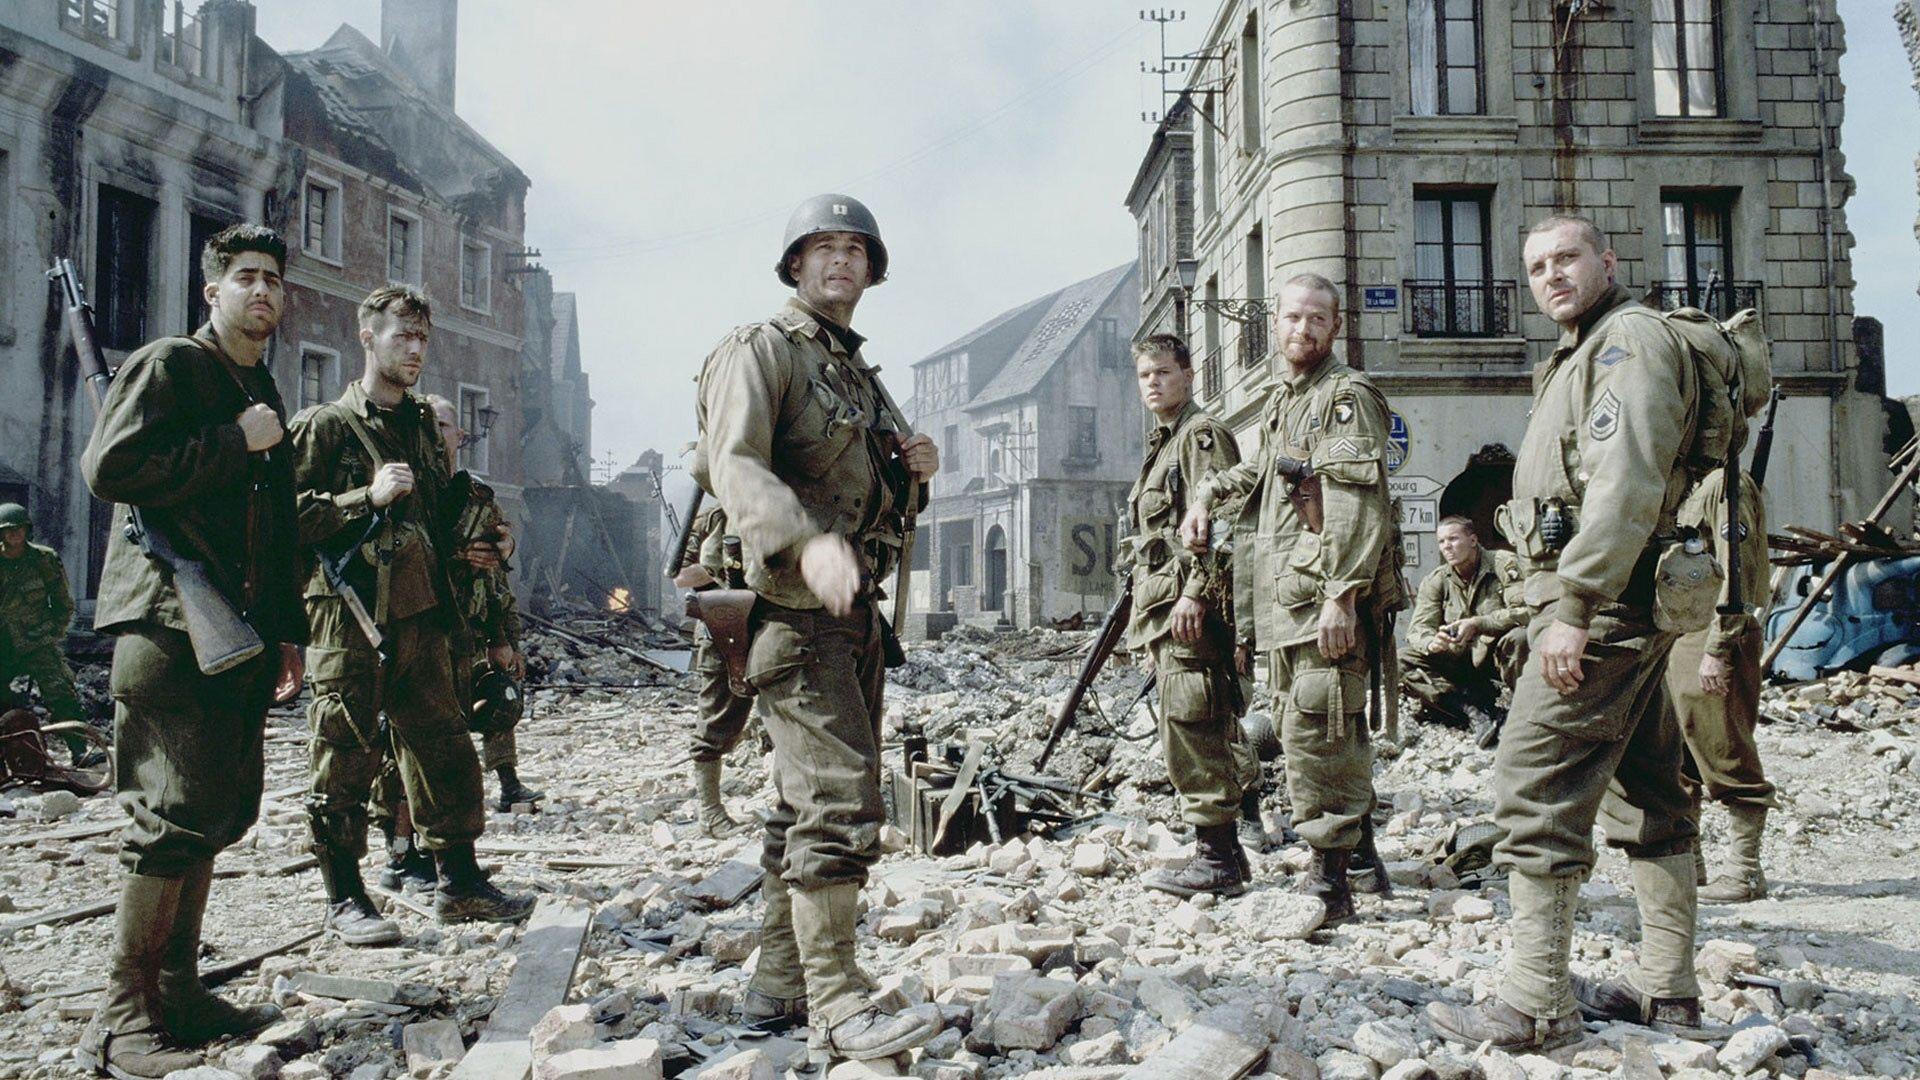 Download Wallpapers Saving private ryan, Soldiers, Tom